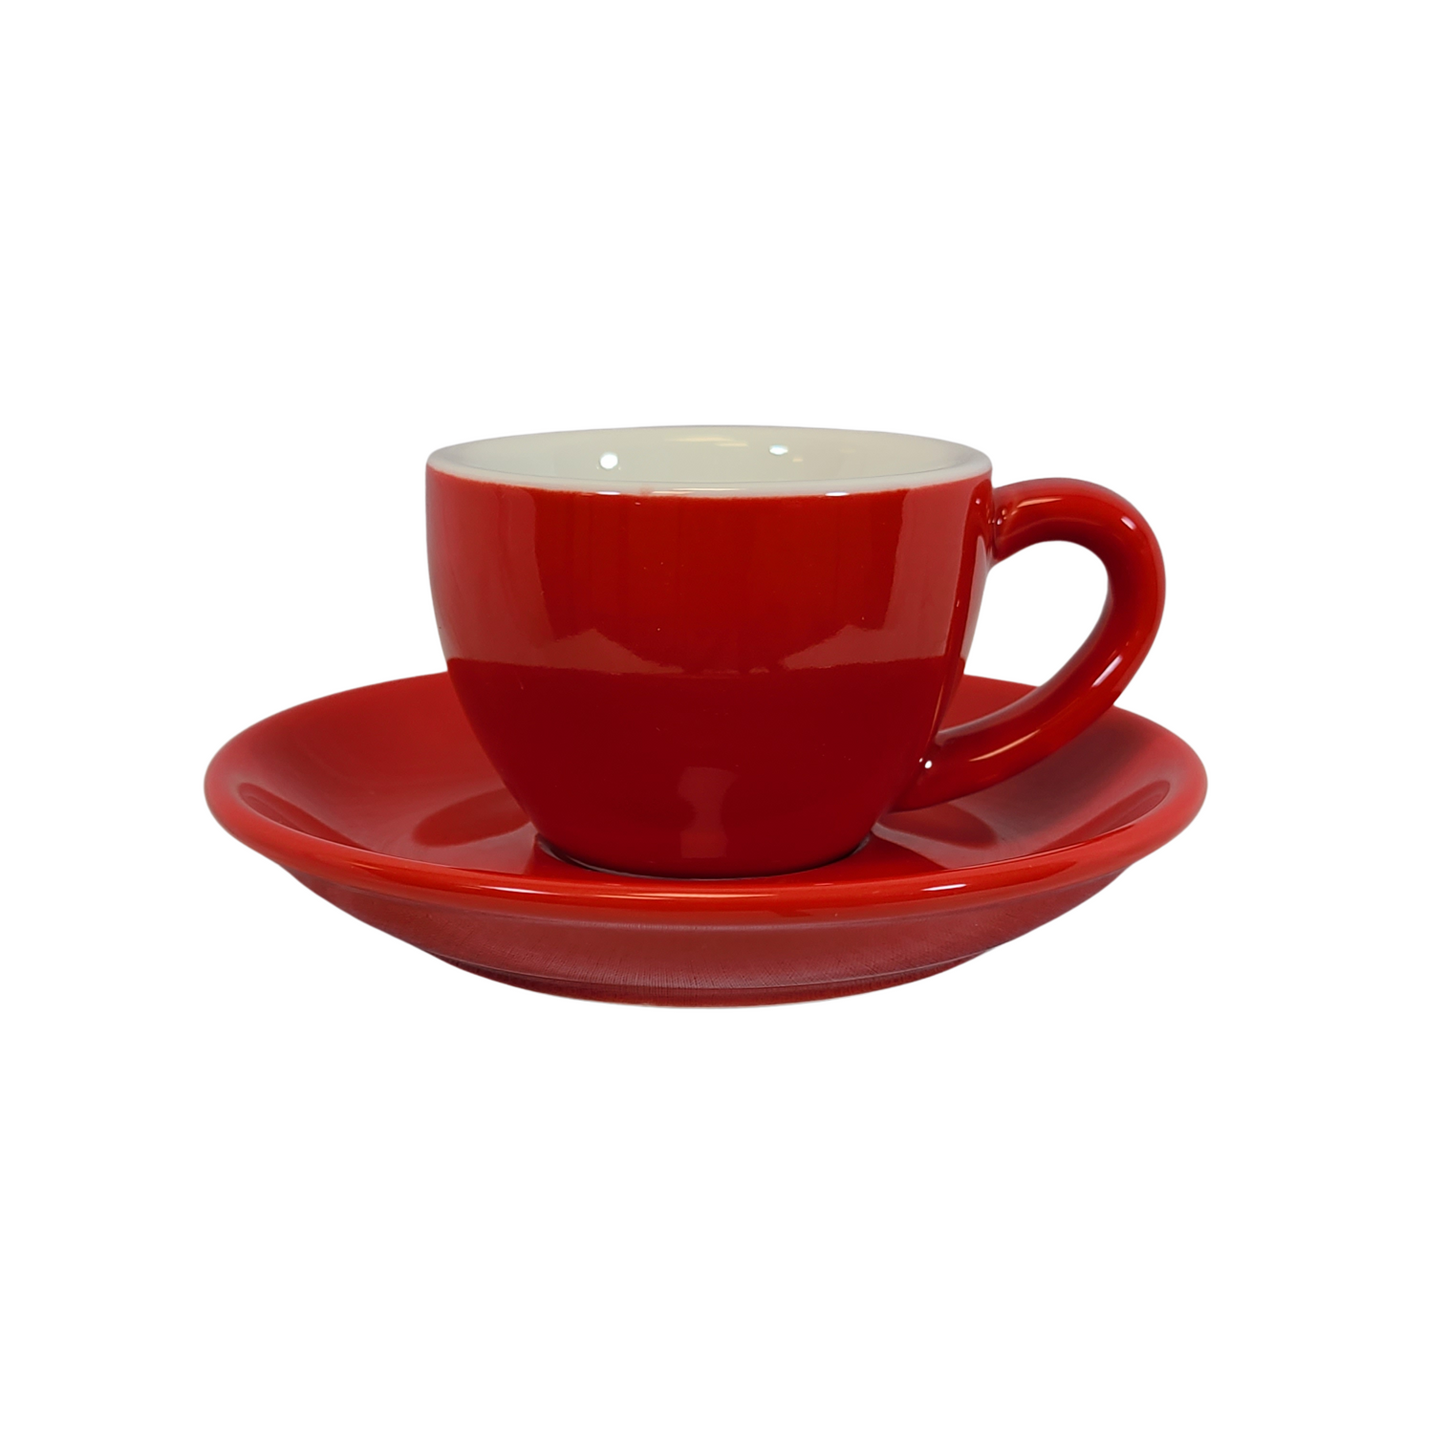 Coffee Addicts commercial ceramic cup with saucer in glossy red espresso cup 2.7oz 80ml